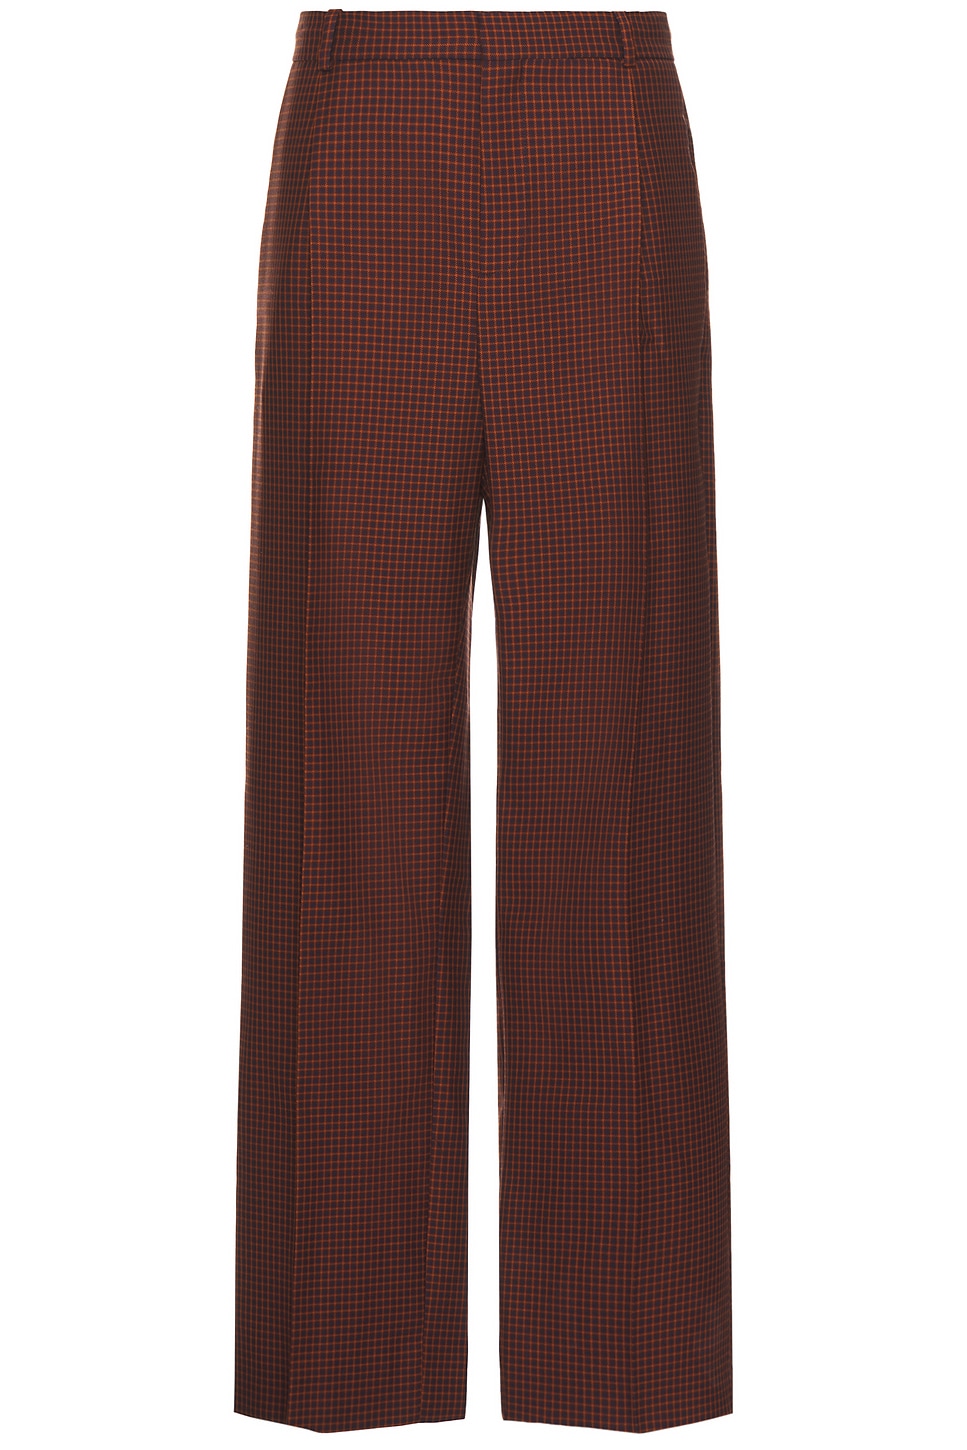 Image 1 of BOTTER Classic Trousers With Pleat in Red Check